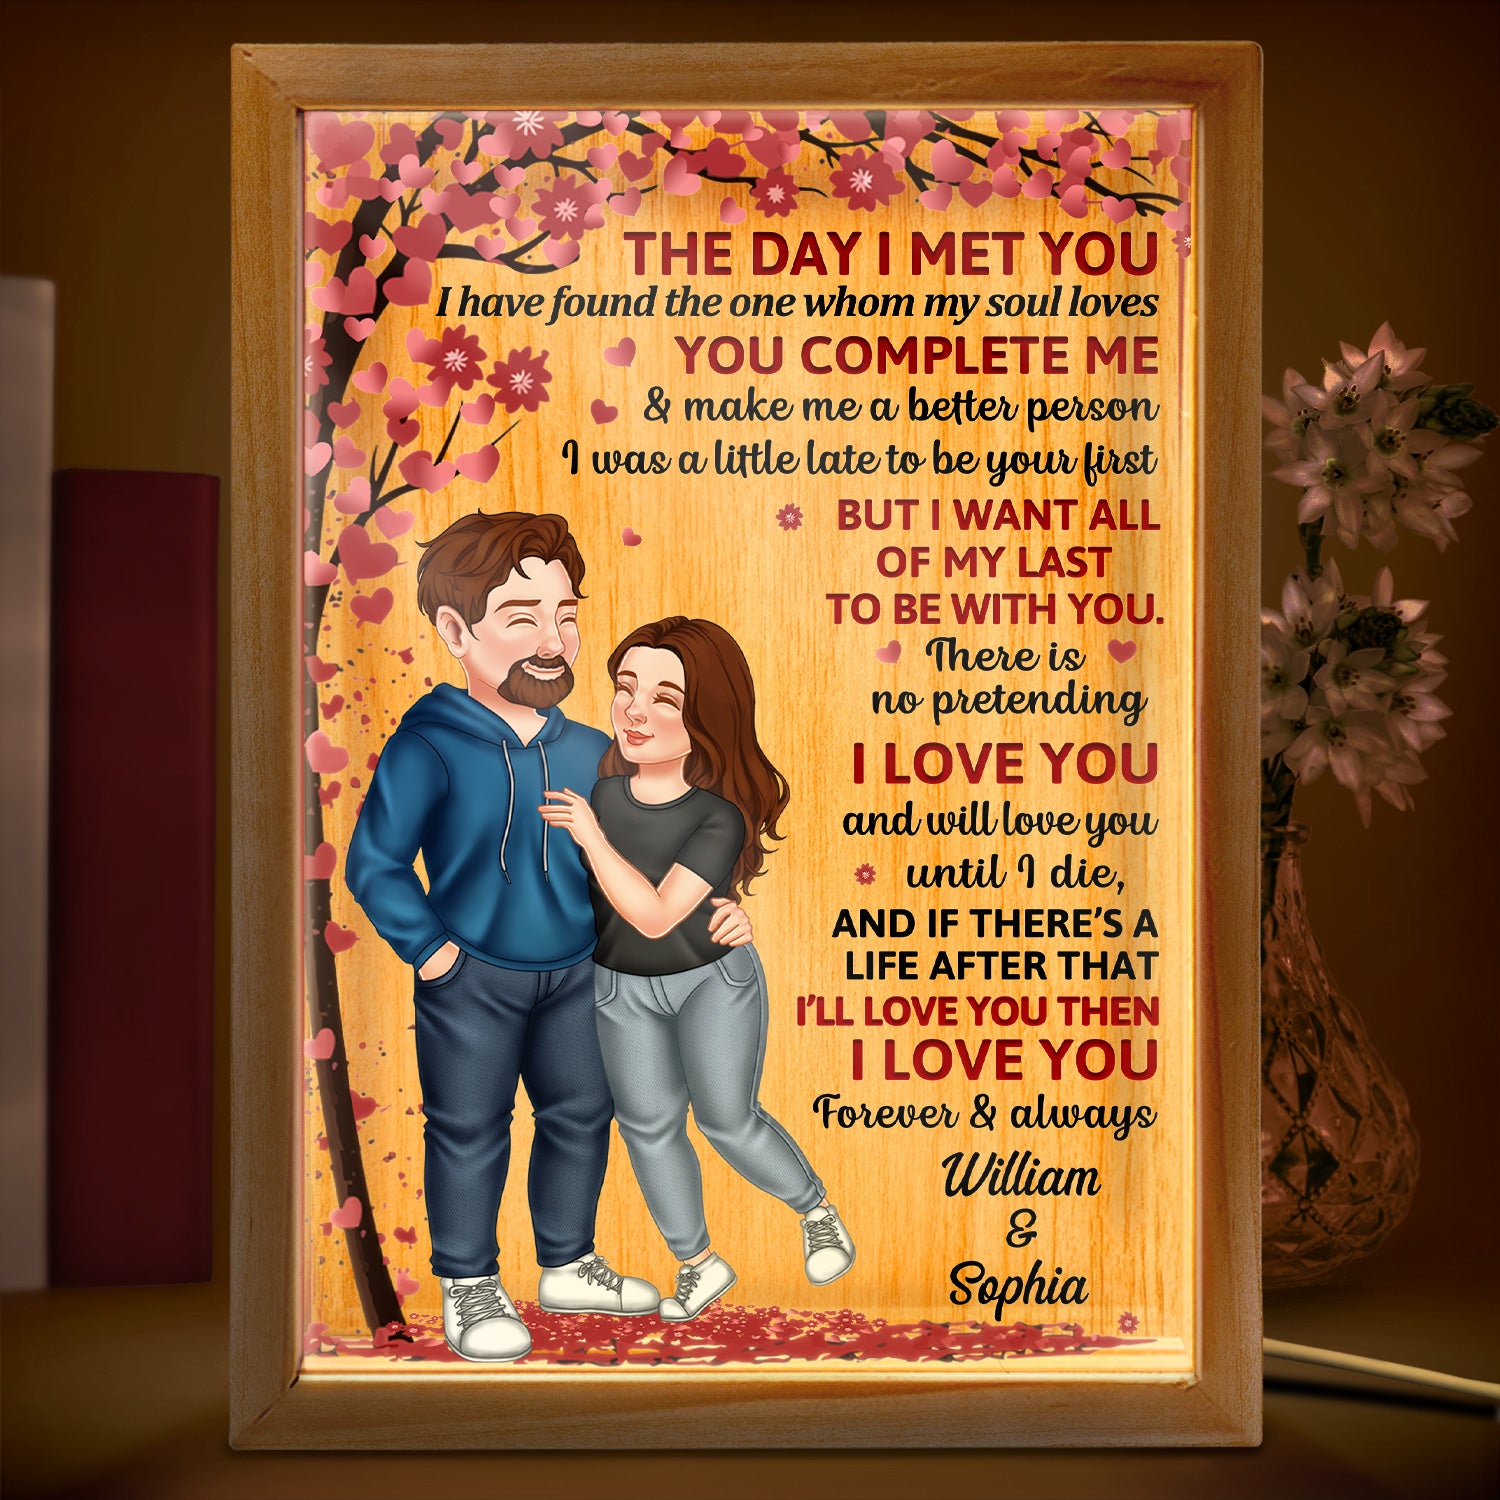 The Day I Met You Arm In Arm - Loving, Anniversary Gift For Couples, Husband, Wife - Personalized Picture Frame Light Box